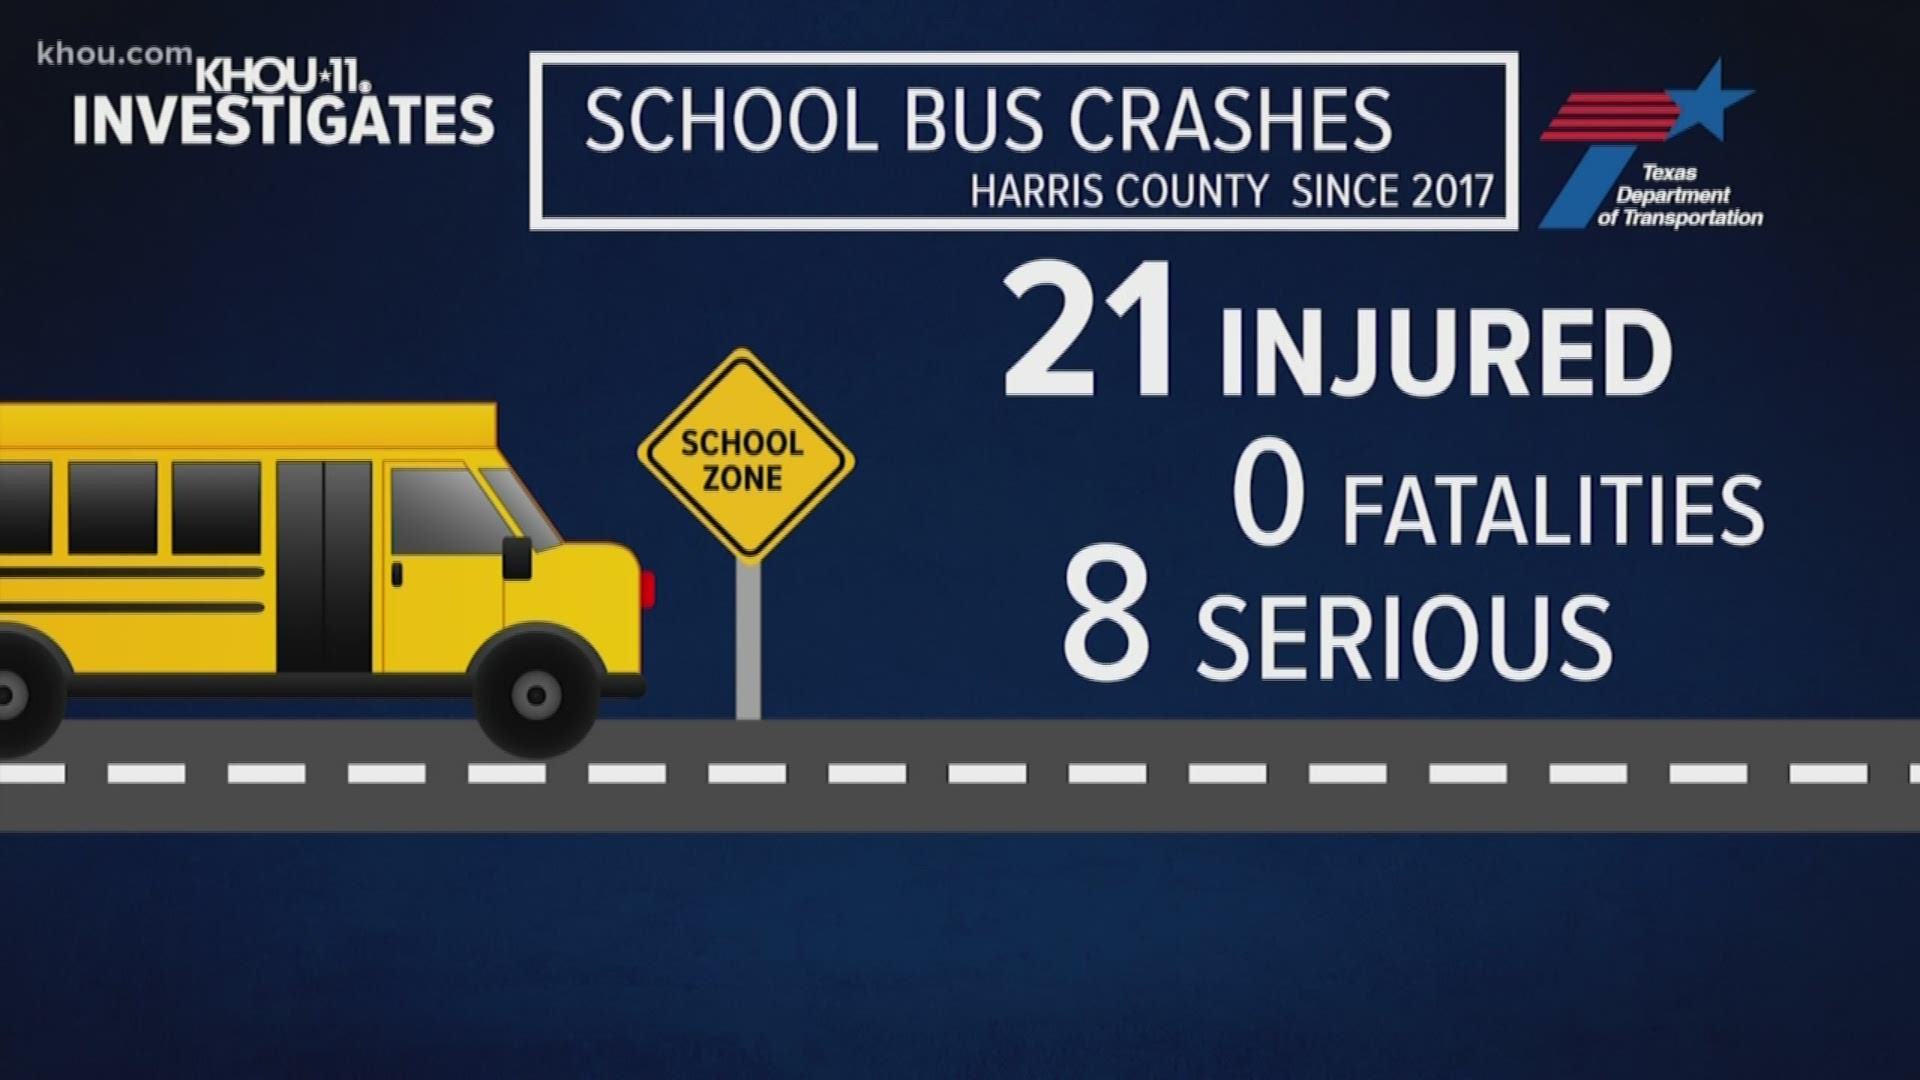 Since 2017, there have been 41 crashes involving pedestrians in Harris County school zones.